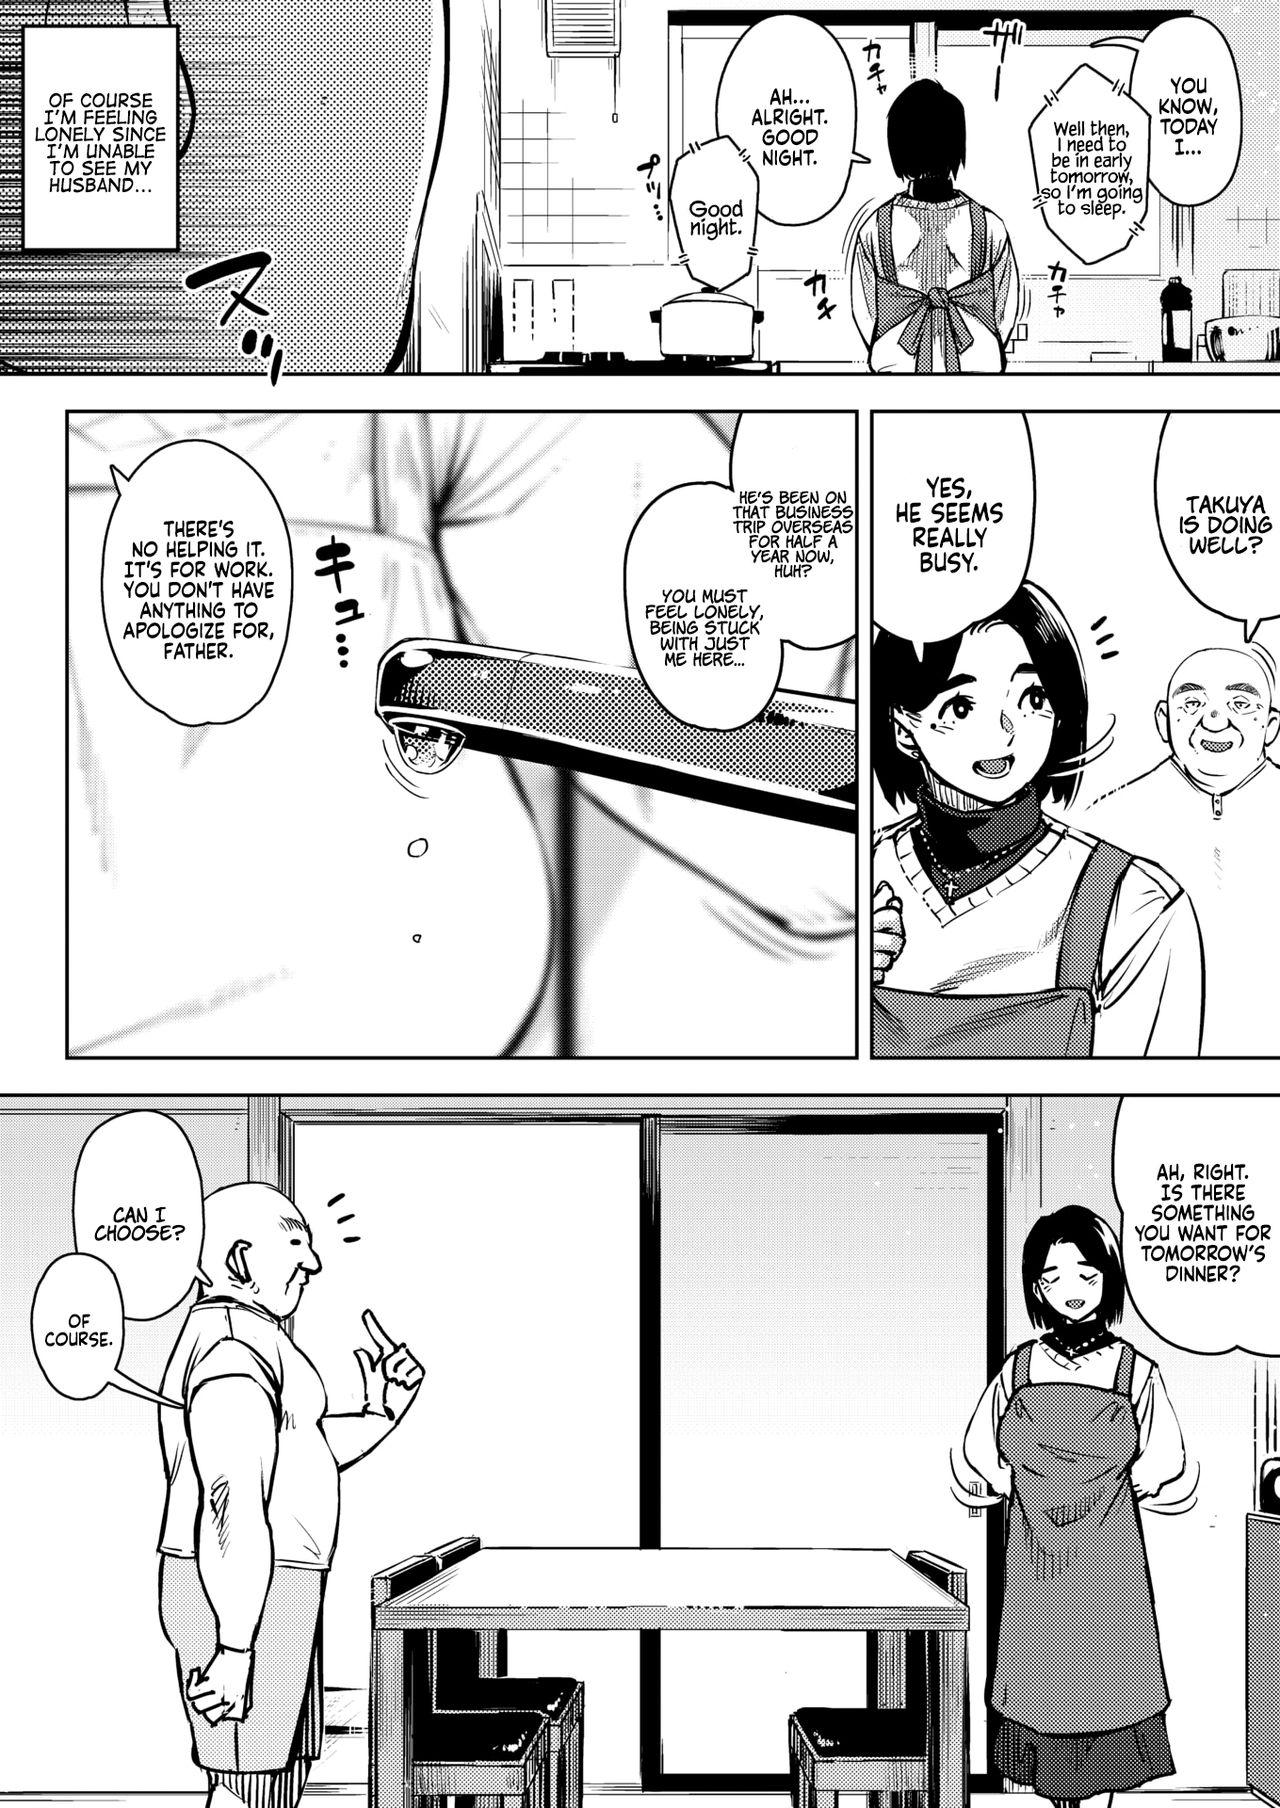 Hot [Rocket Monkey] Gifu to... Zenpen | With My Father-in-Law... First Part (COMIC HOTMiLK Koime Vol. 27) [English] [Coffedrug] [Digital] Female Domination - Page 2